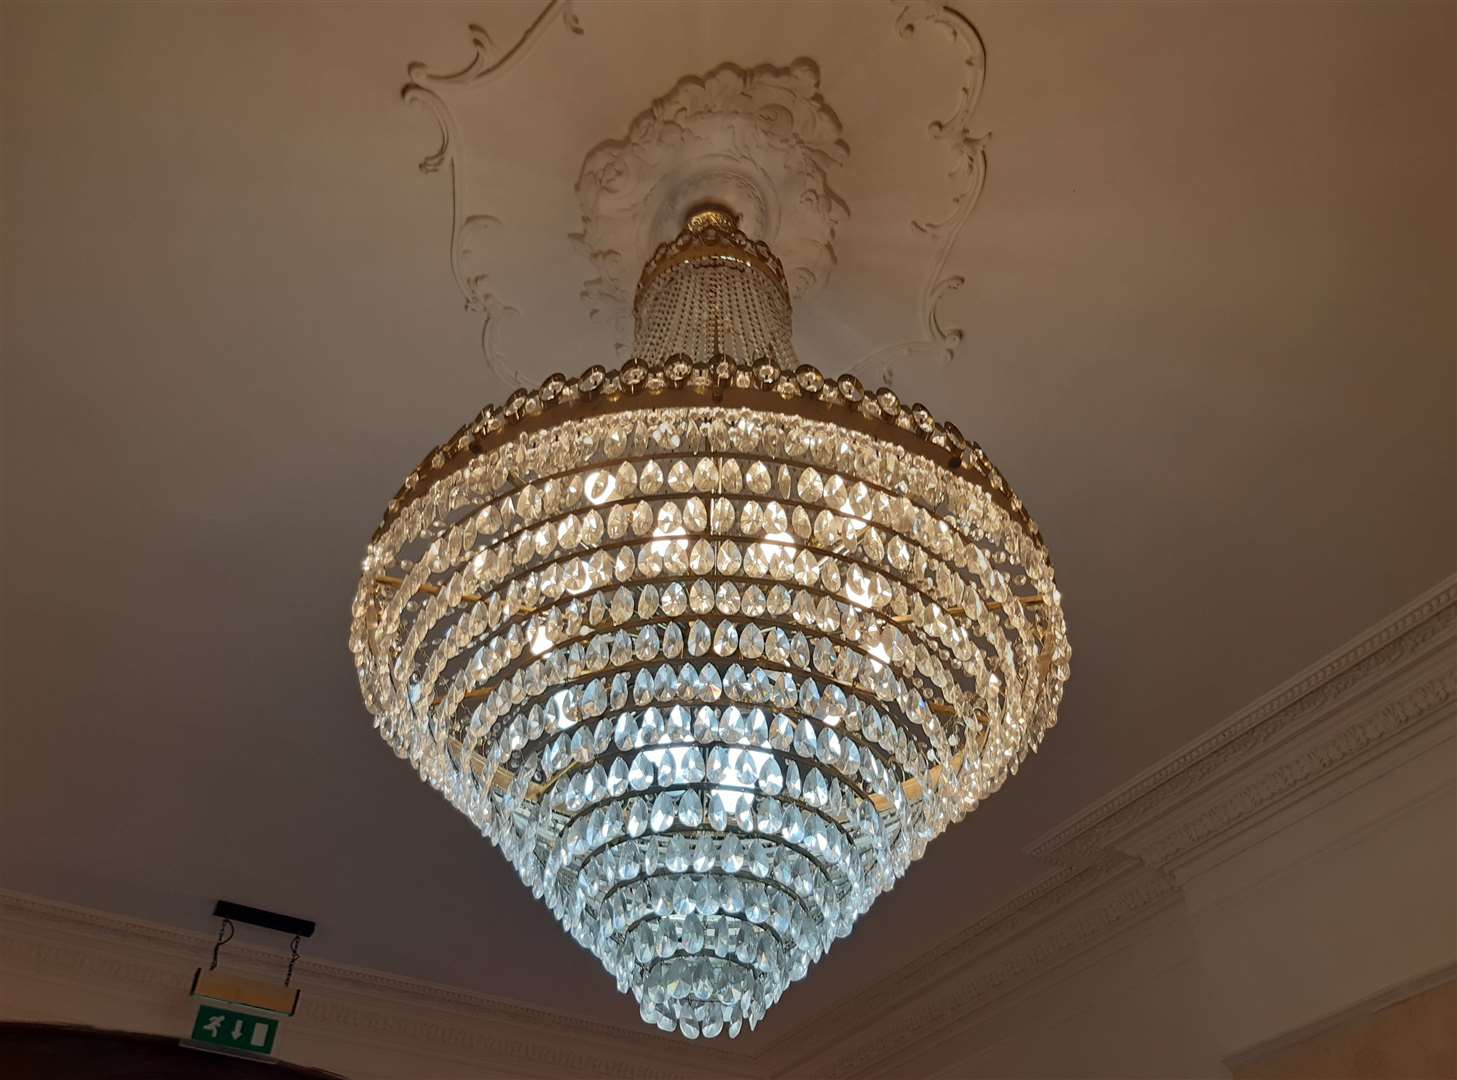 A beautiful chandelier, complete with an intricately carved ceiling, hangs in the kitchen